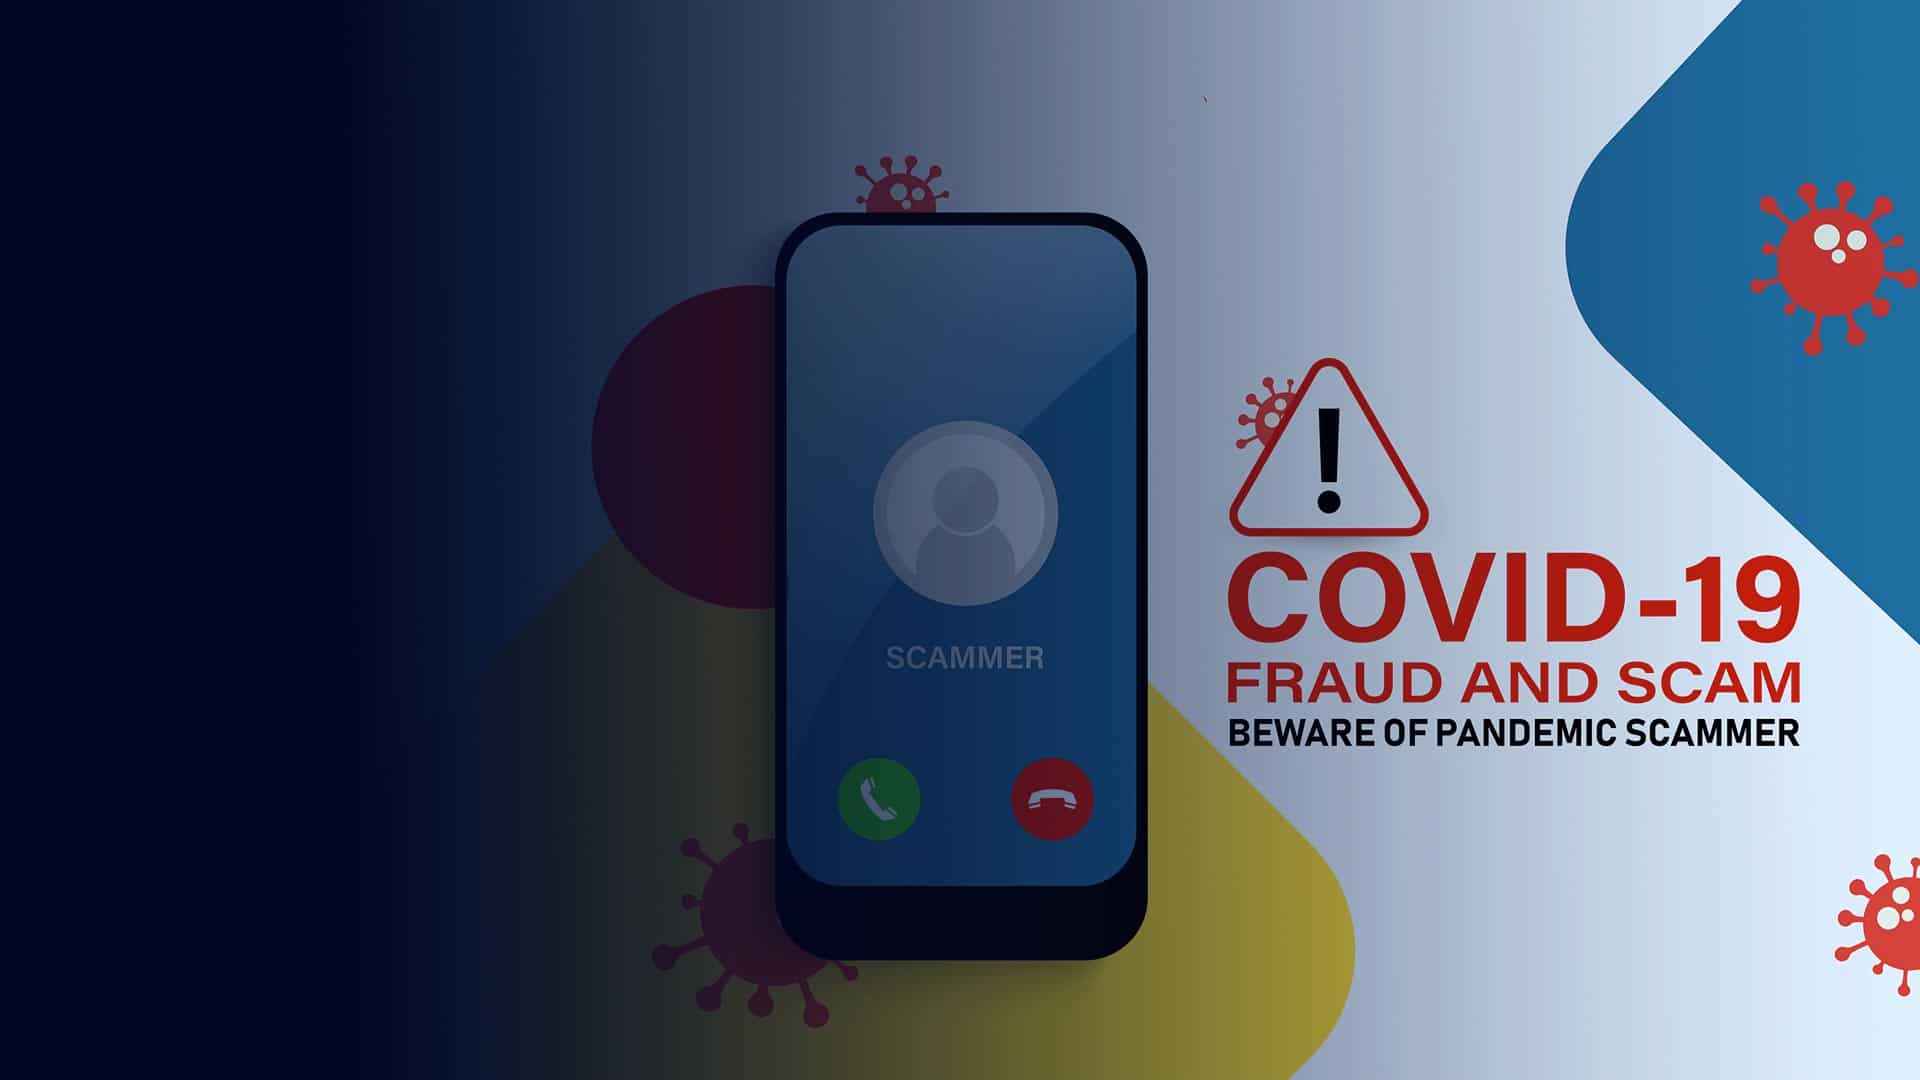 COVID-19 scam alert and how to avoid them